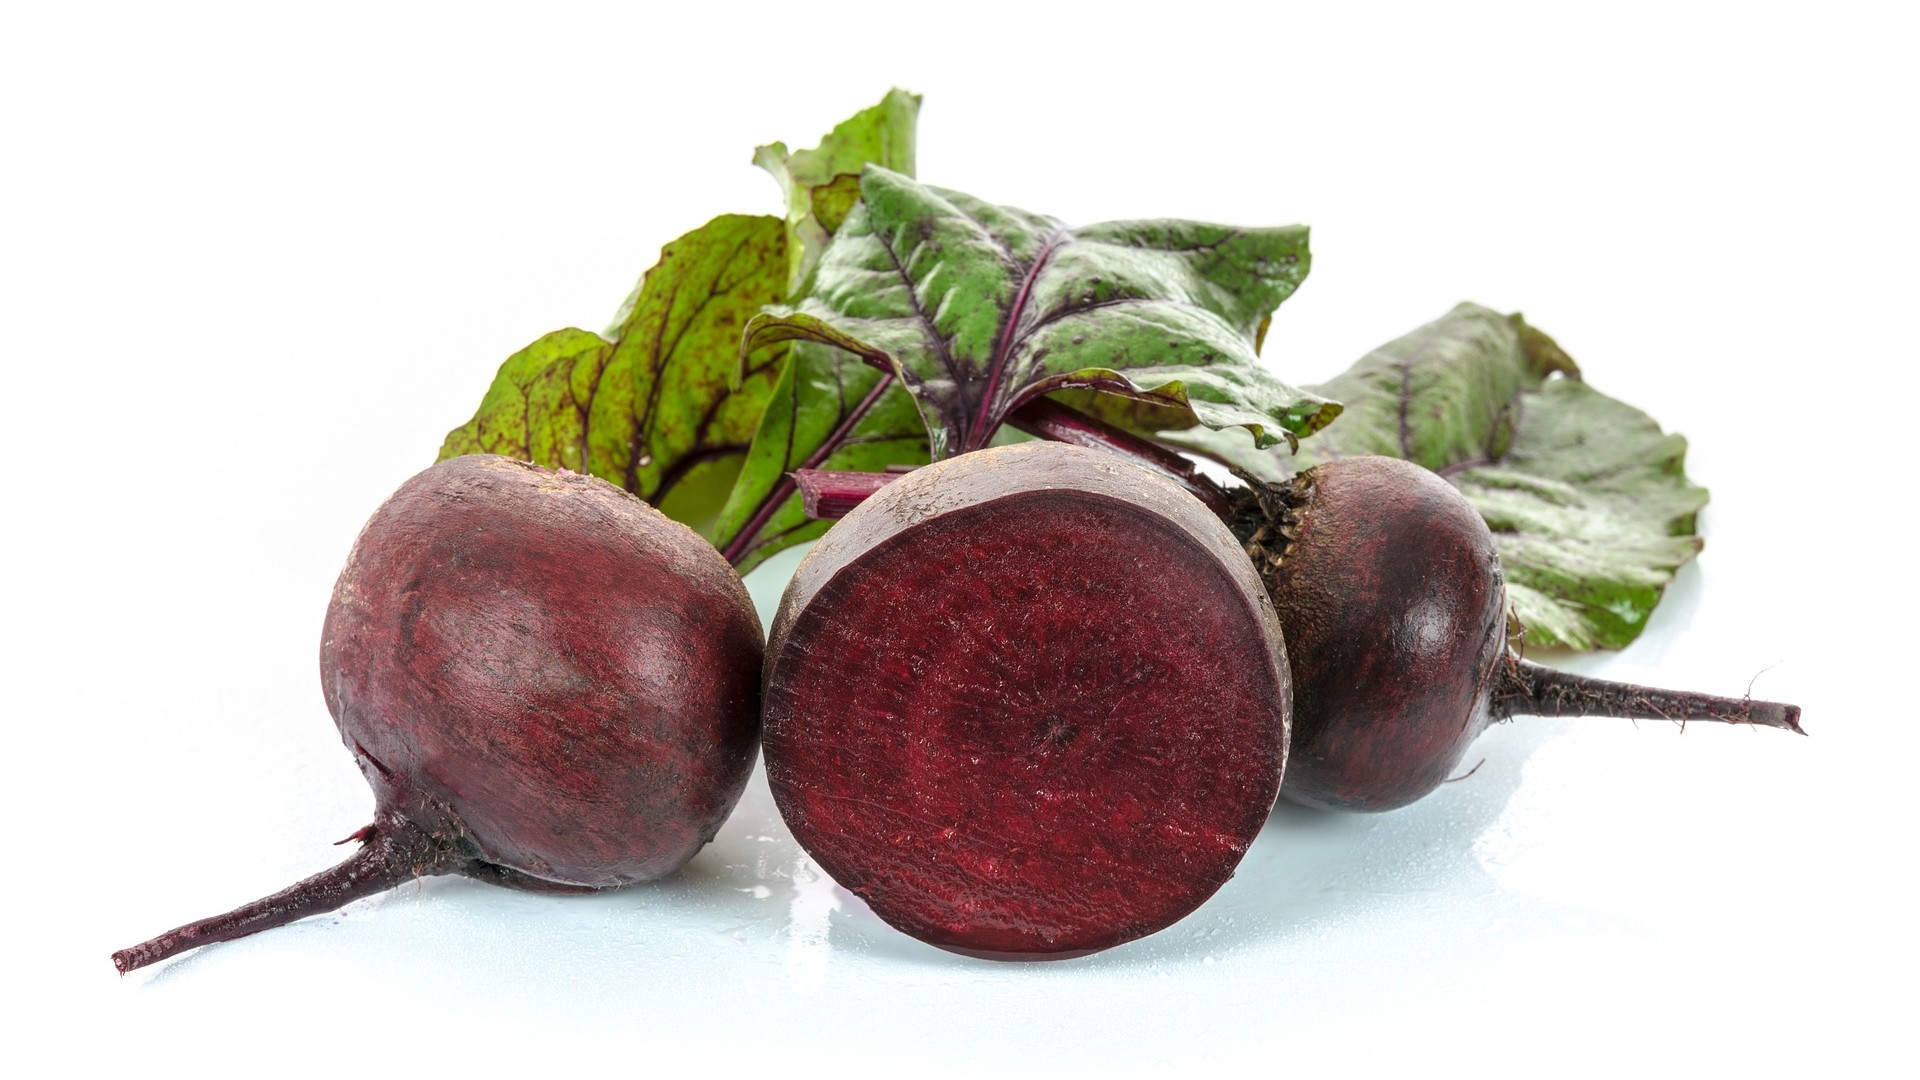 red-beets-g67778b28f_1920